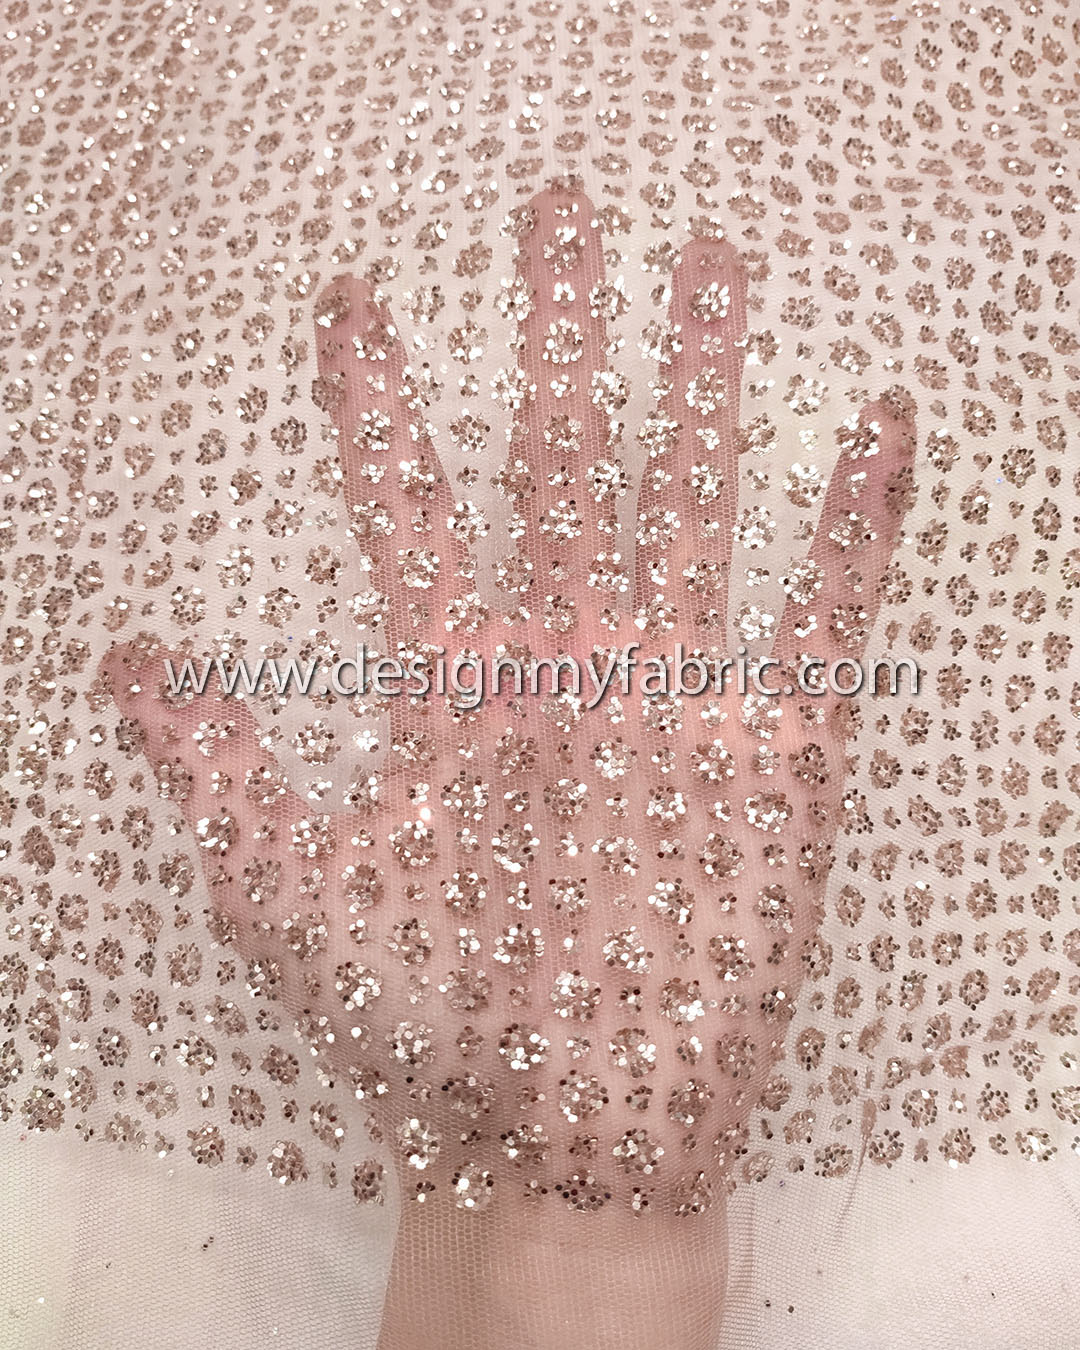 Light pink with light gold glitter lace fabric #99152 - Design My Fabric